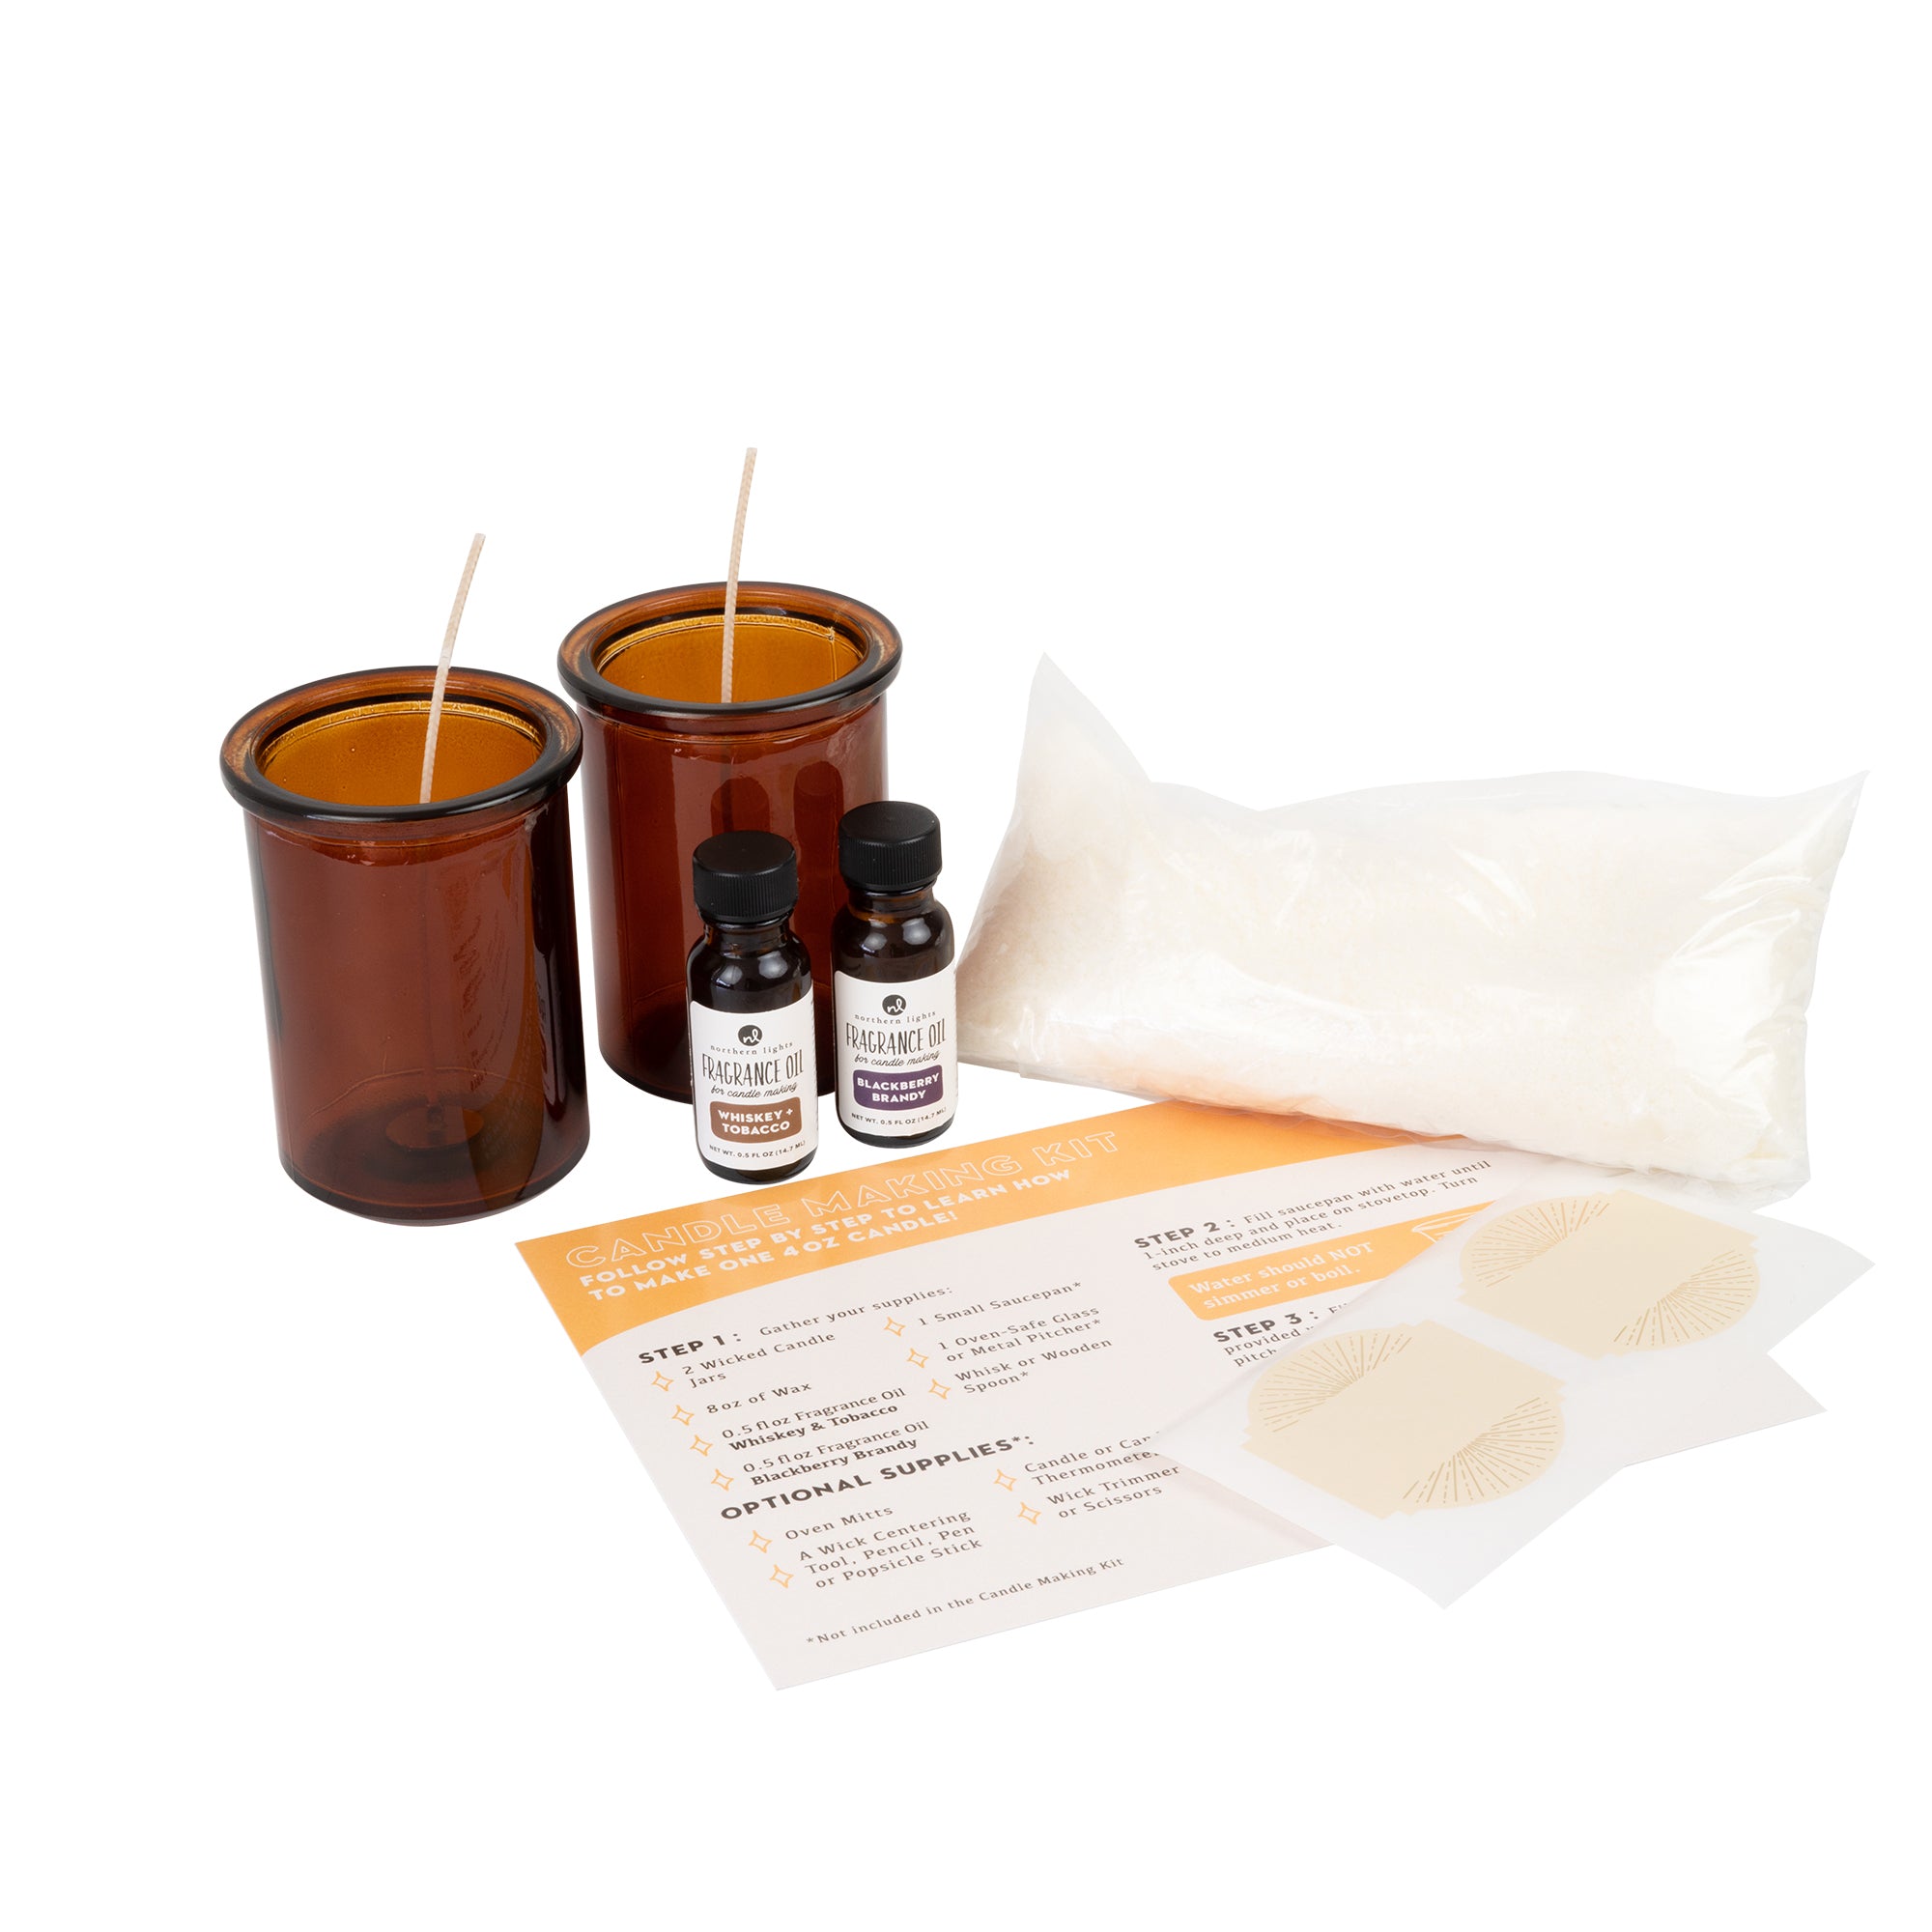 Candle Making Kits for sale in Darnestown, Maryland